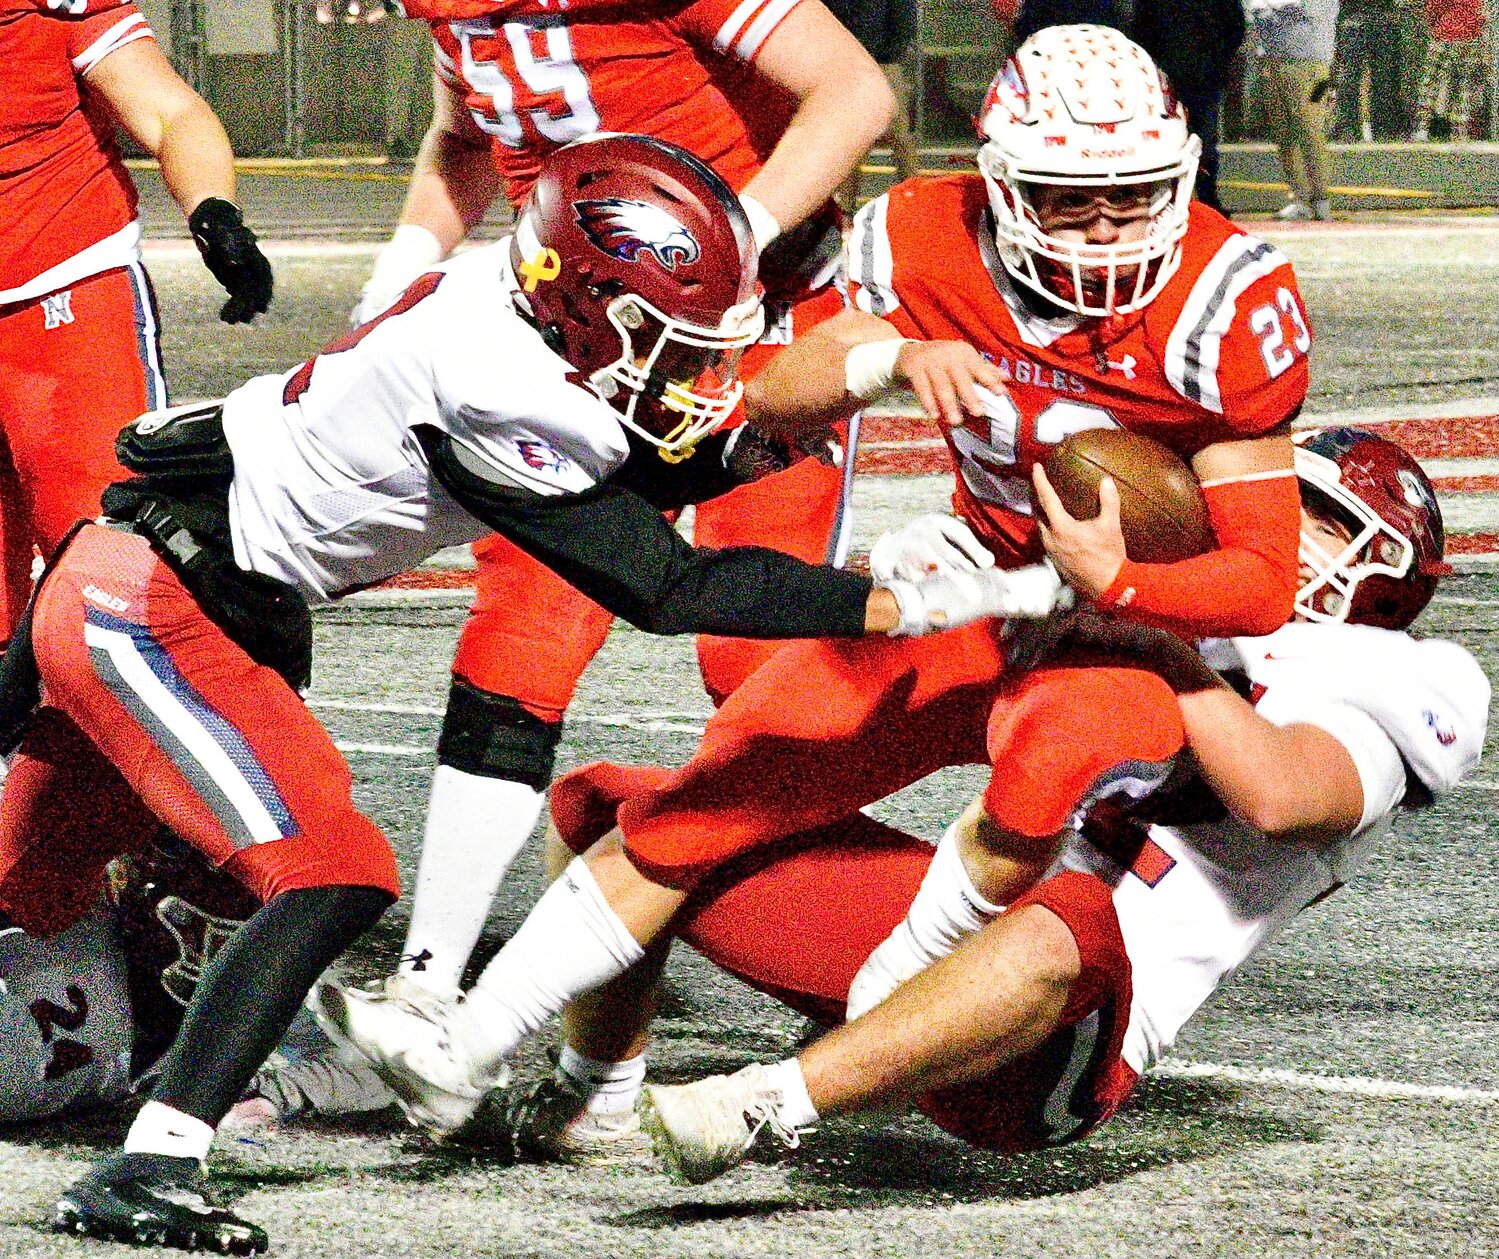 NIXA'S MALACHI RIDER secures the pigskin while being tackled.